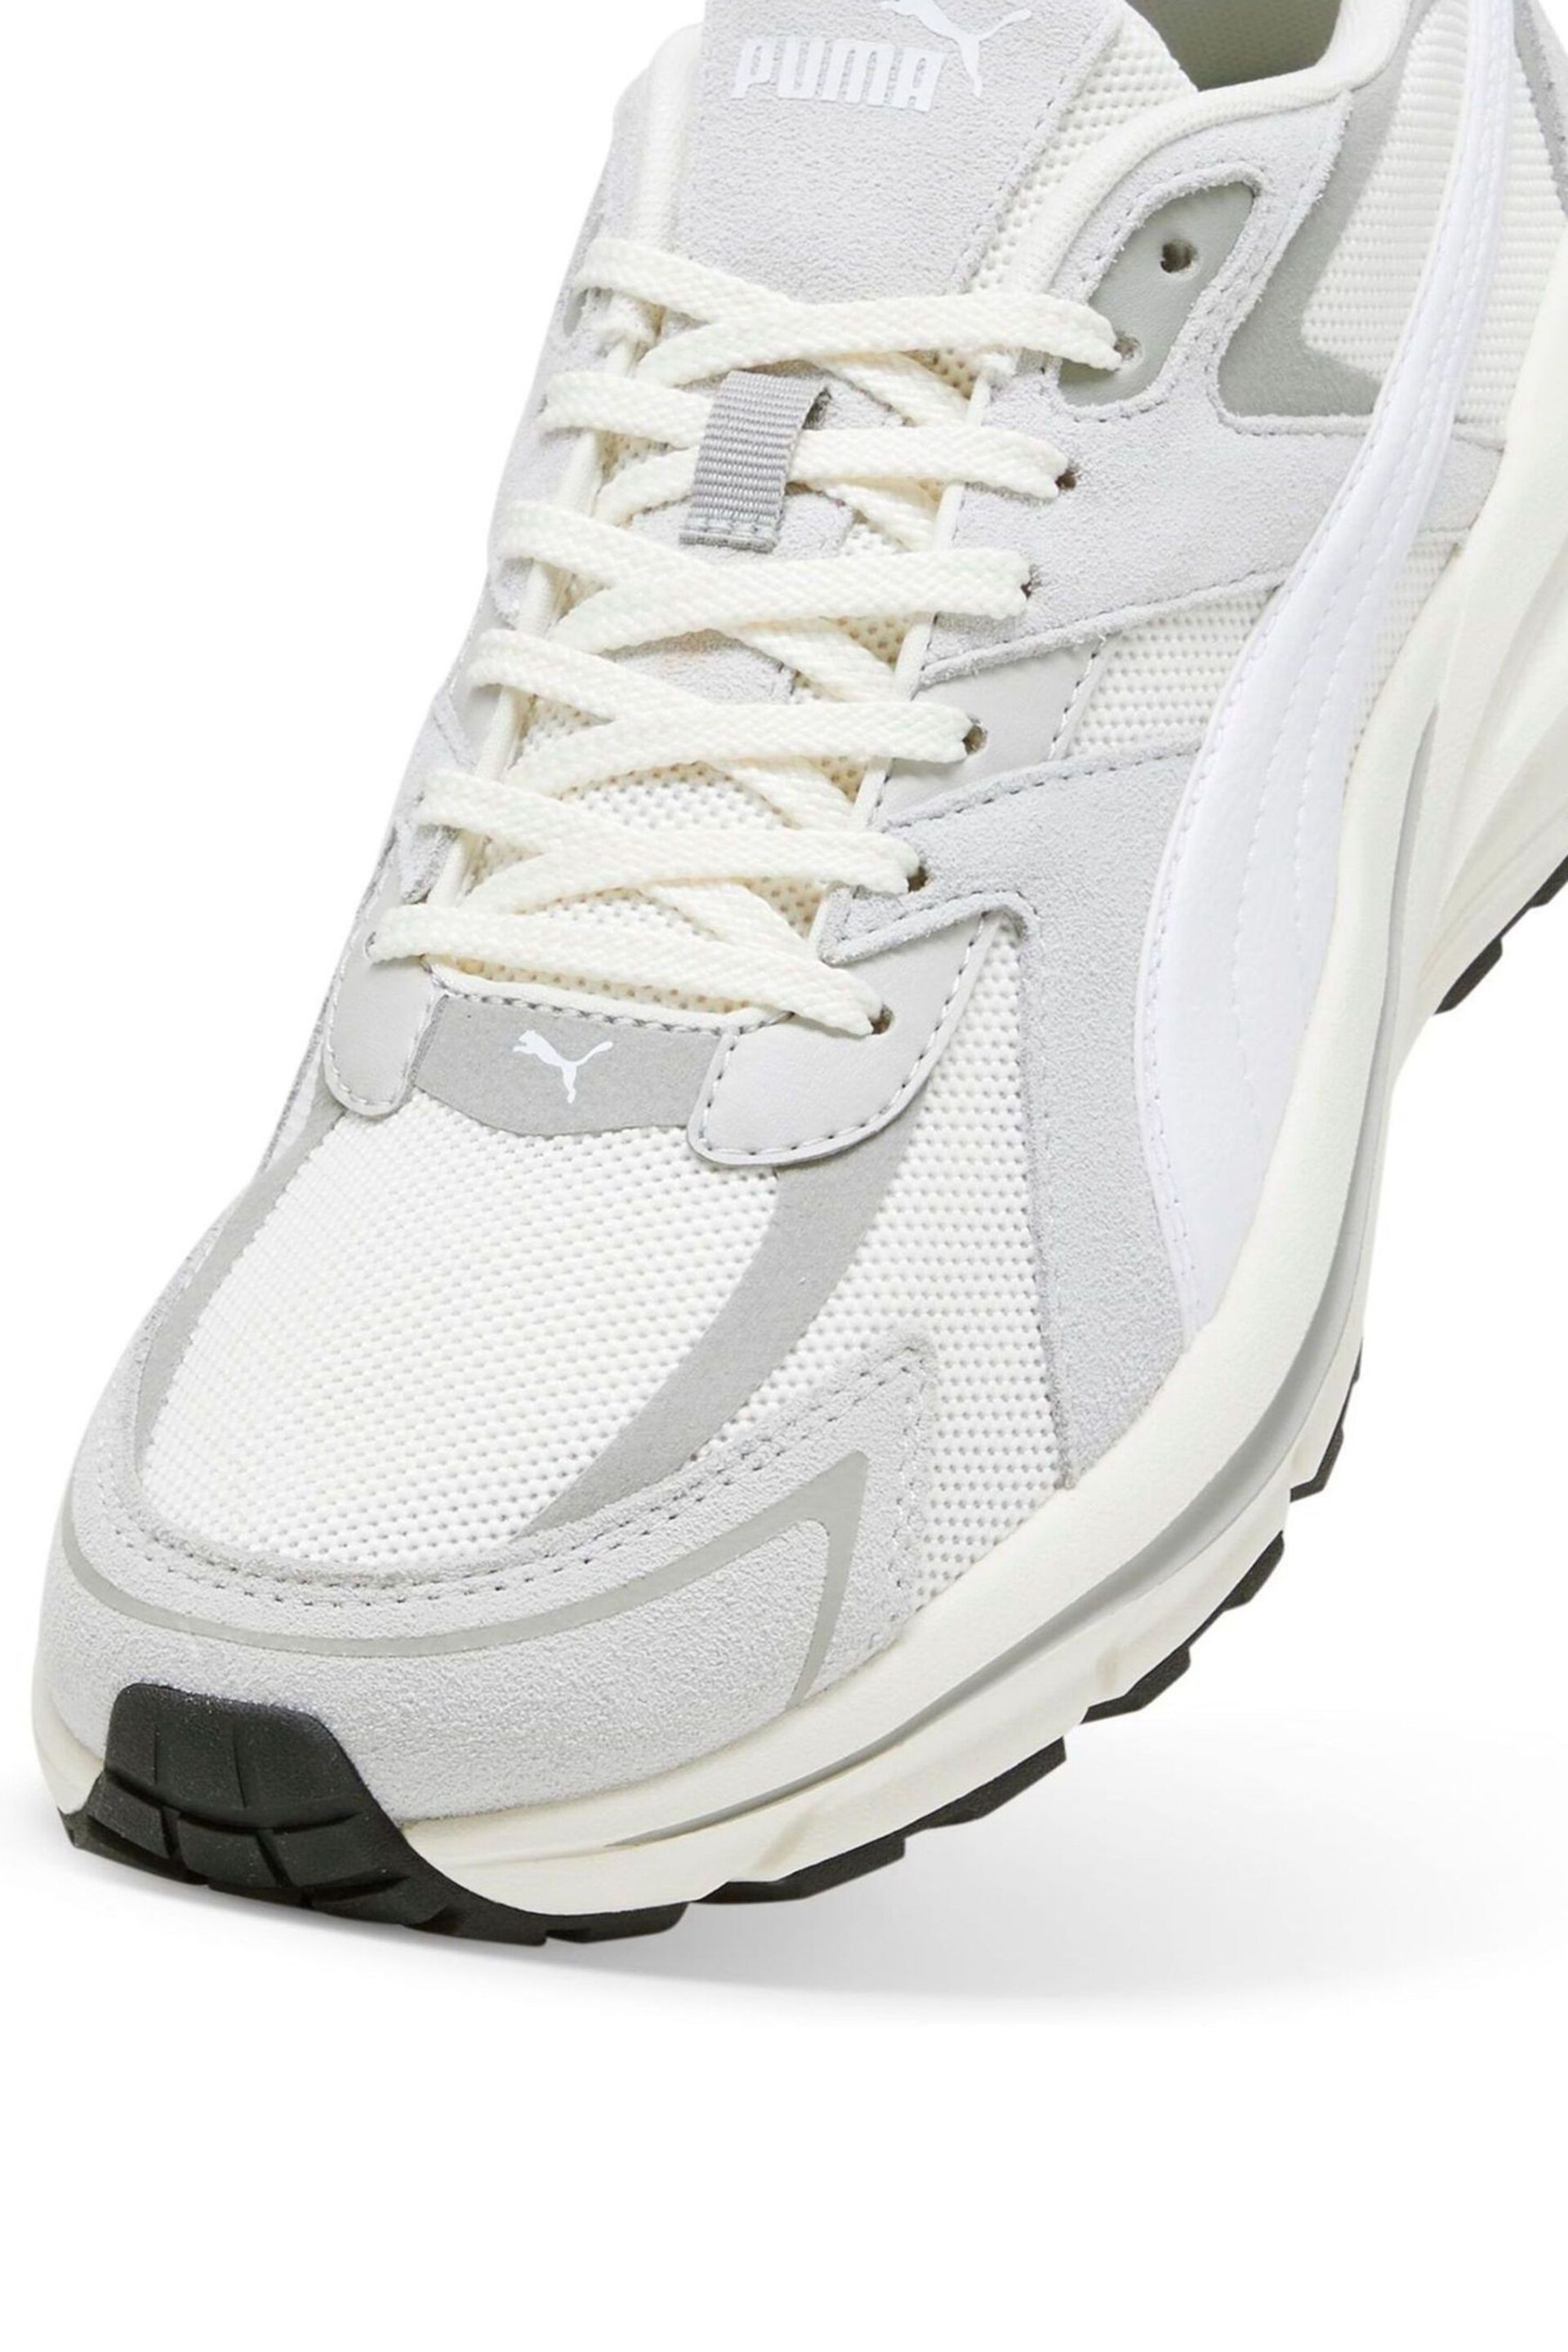 Puma White Mens Hypnotic LS Sneakers - Image 8 of 8